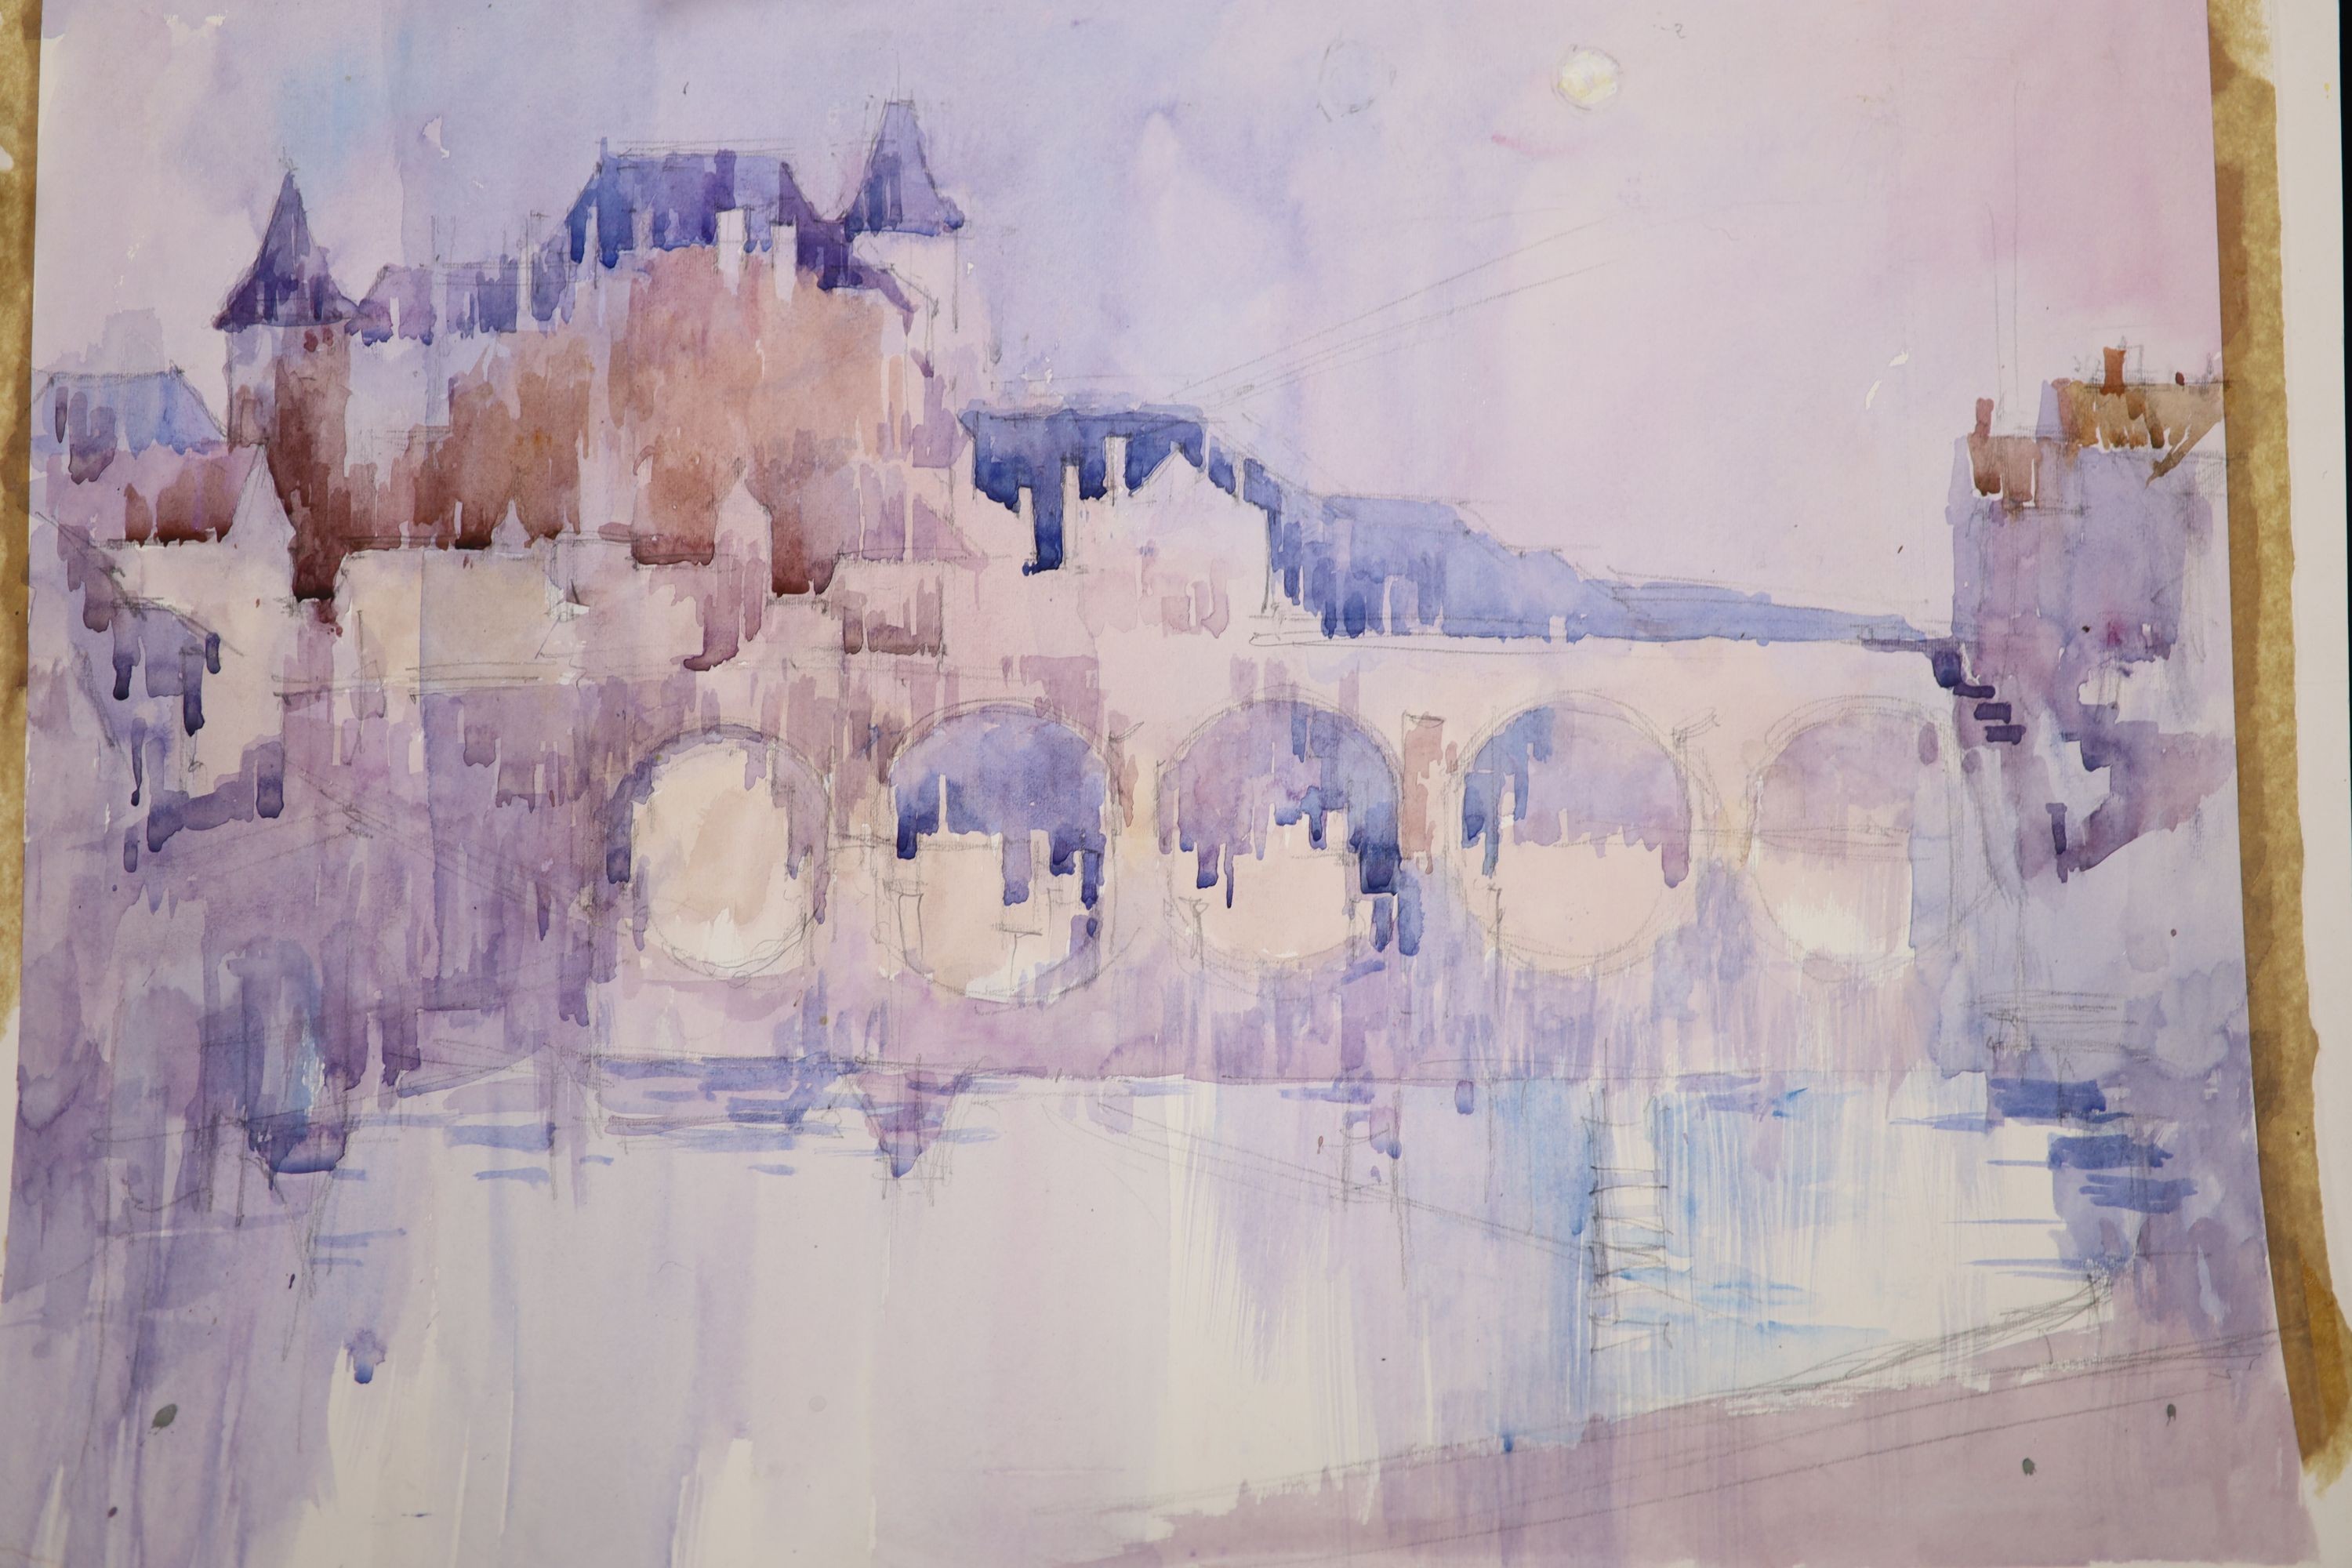 Michael Cadman (1920-2010), a folio of assorted watercolours and prints, Topographical scenes, largest 40 x 56cm, unframed